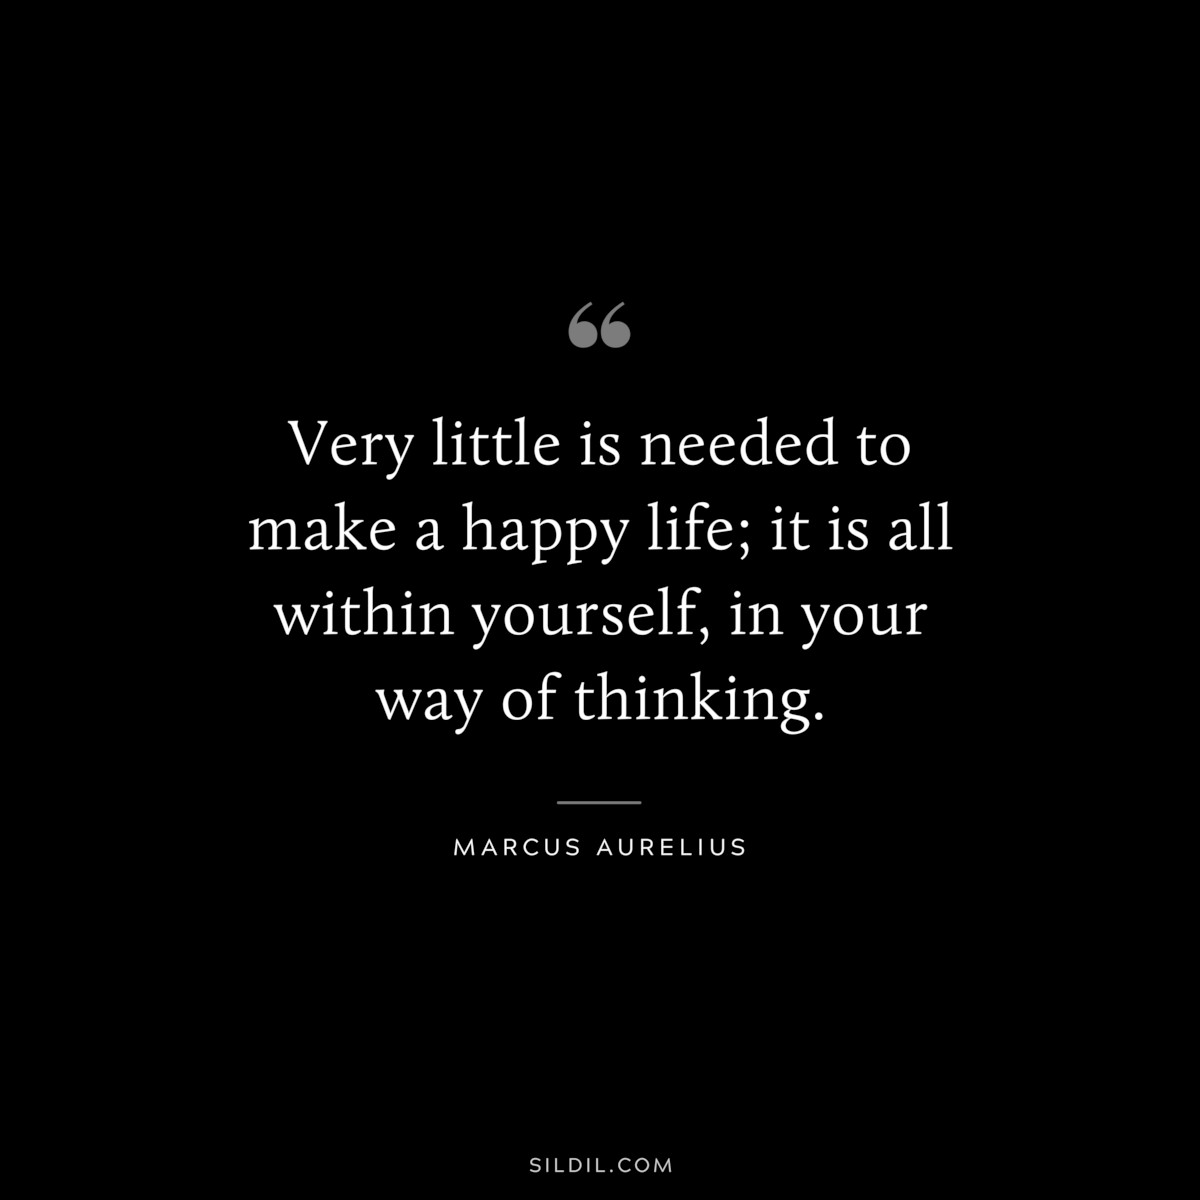 Very little is needed to make a happy life; it is all within yourself, in your way of thinking. ― Marcus Aurelius